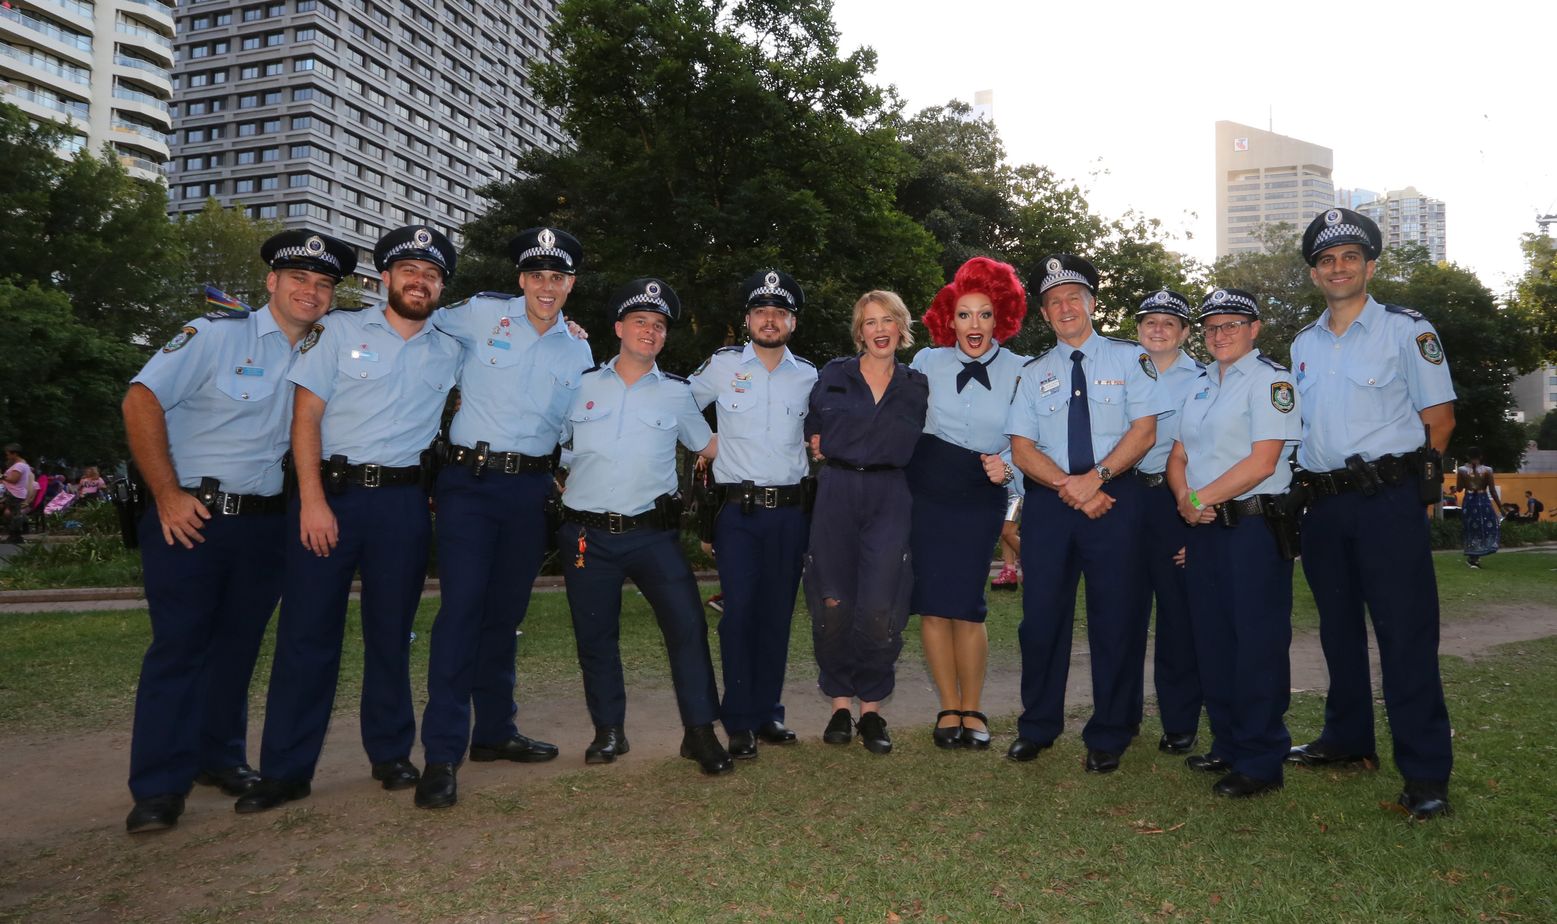 ‘When I look at our recruits I don’t see discrimination’: NSW Police Assistant Commissioner